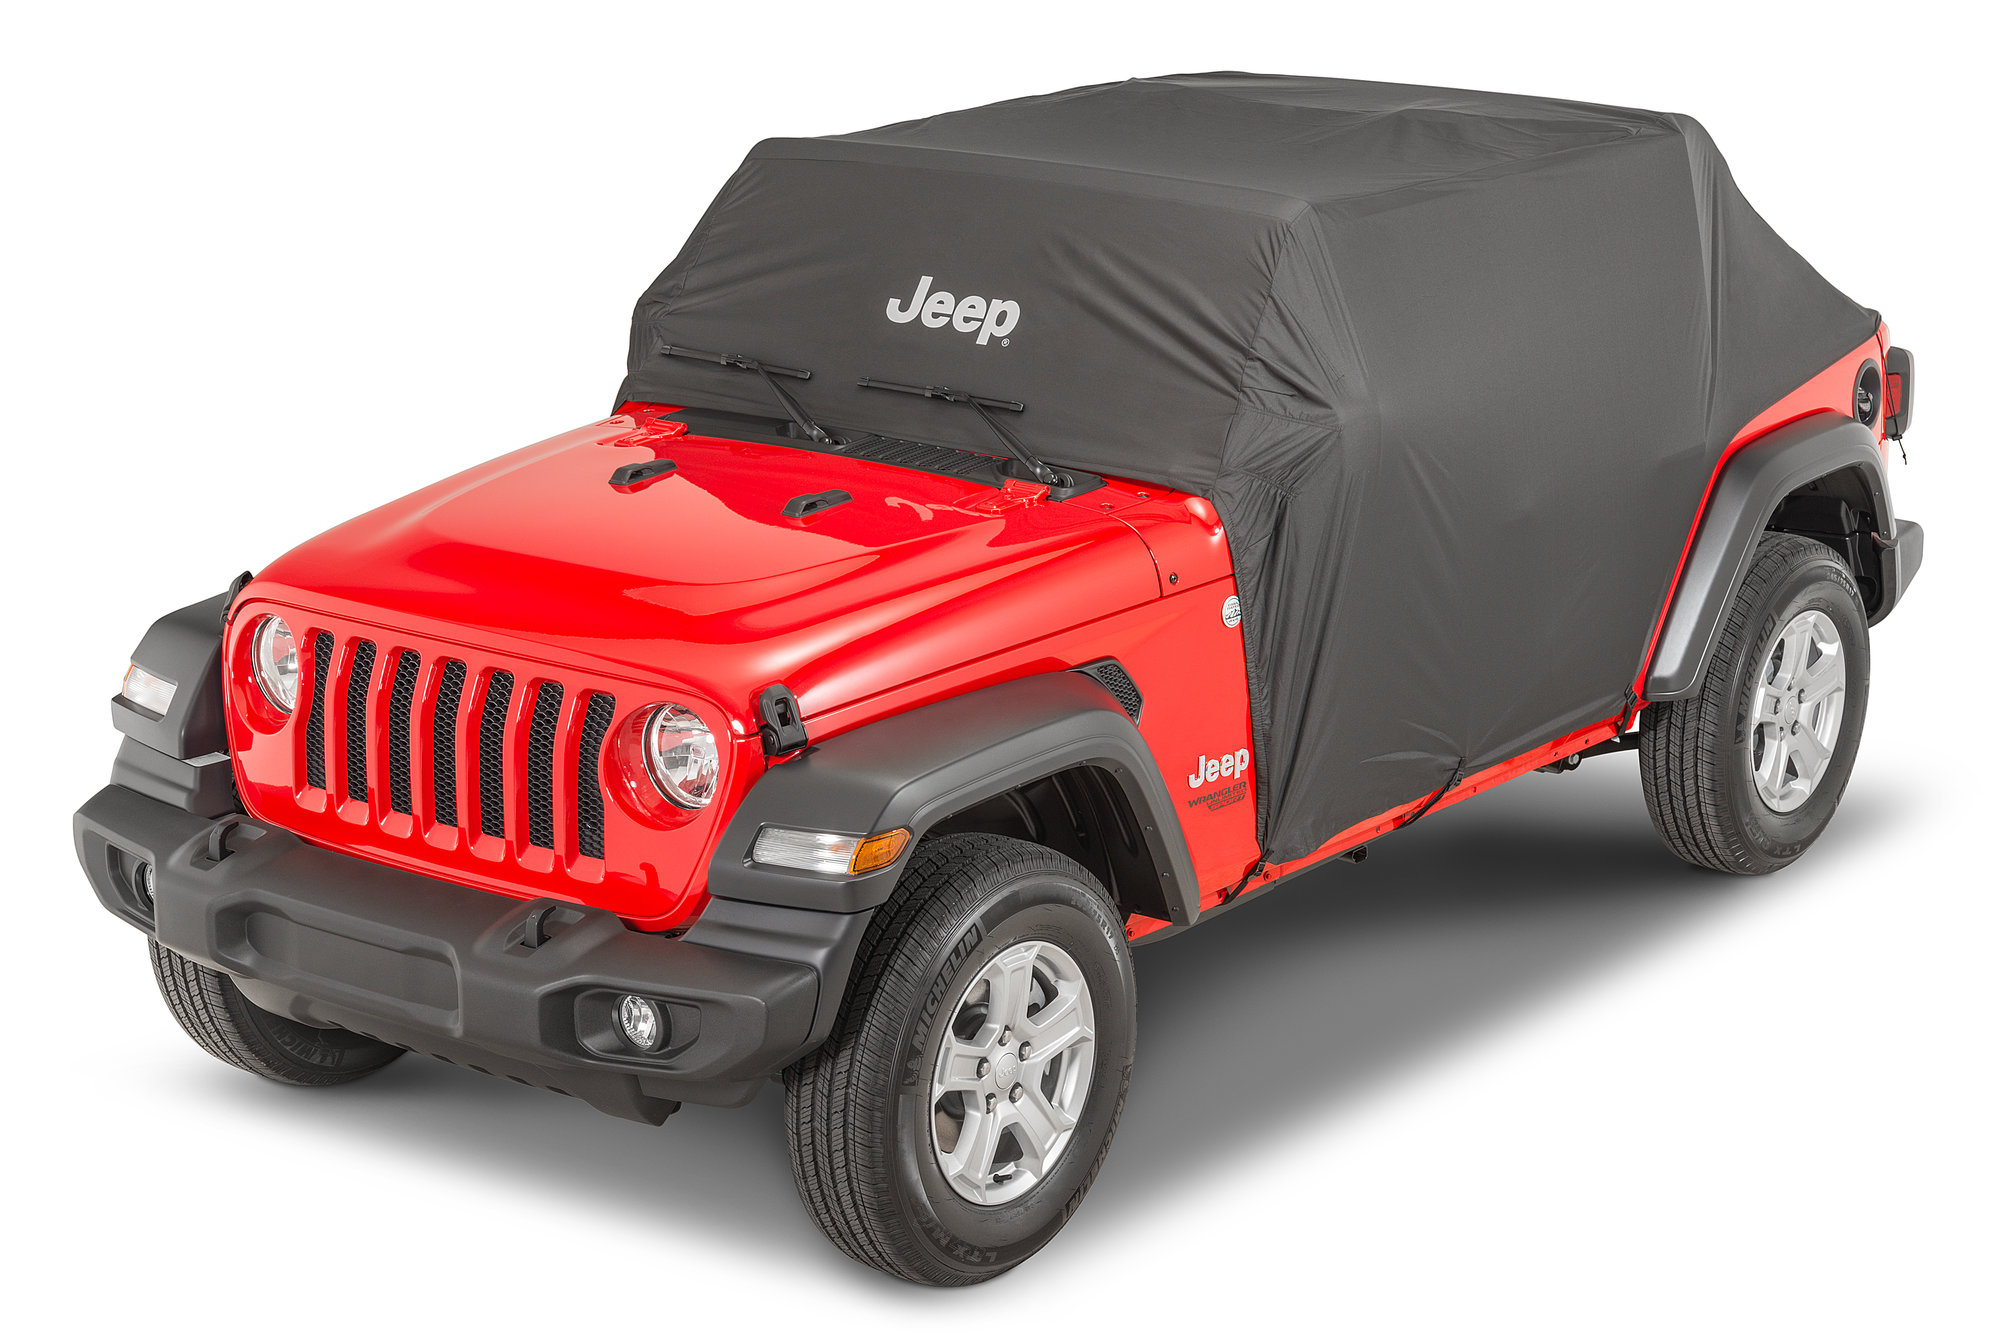 Yoursme Cab Cover 82215370 Car Cover Protection for 2007-2020 Jeep Wrangler JL JK 4 Door & Hard top Off